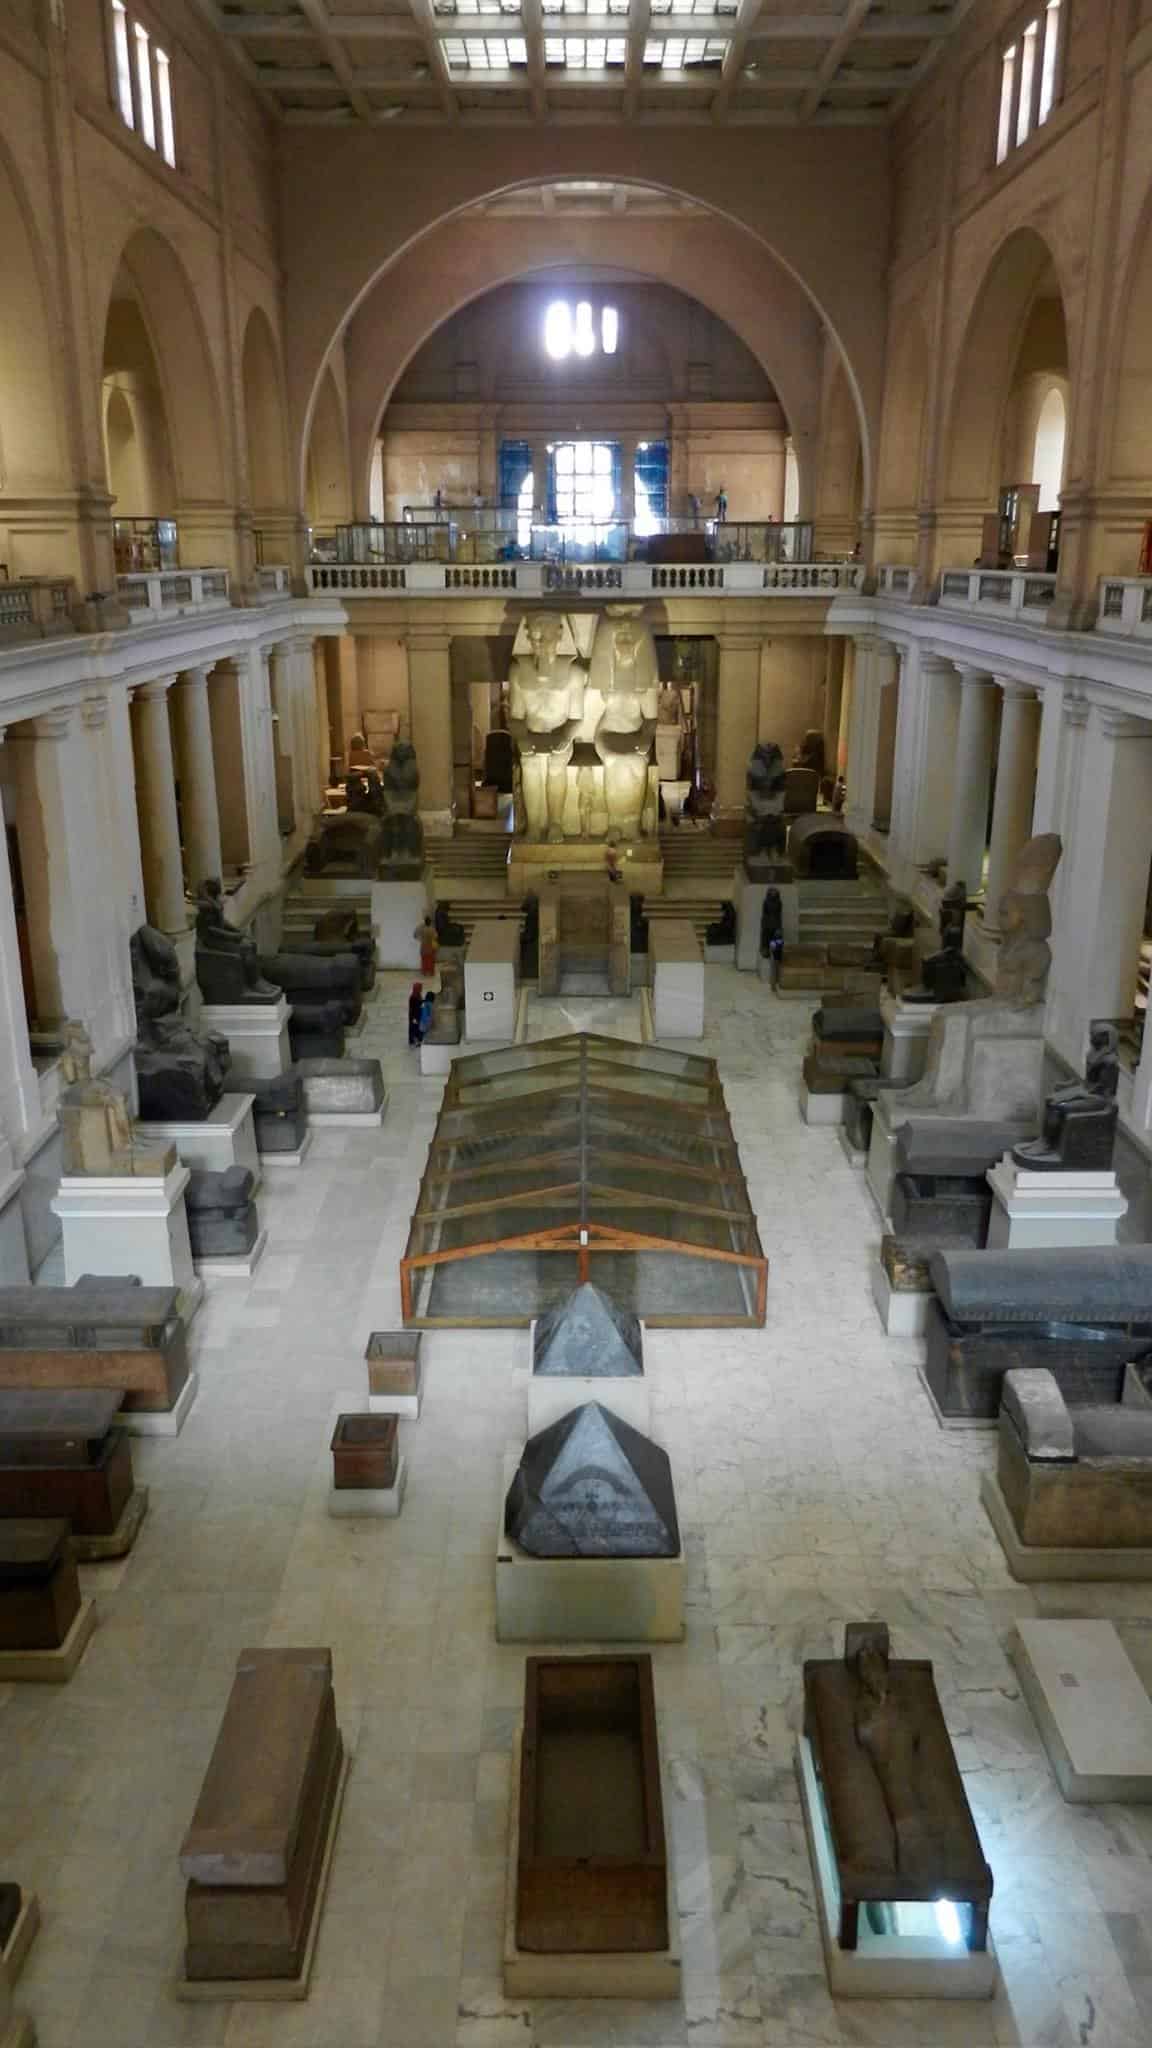 The Egyptian Museum in Cairo, Egypt